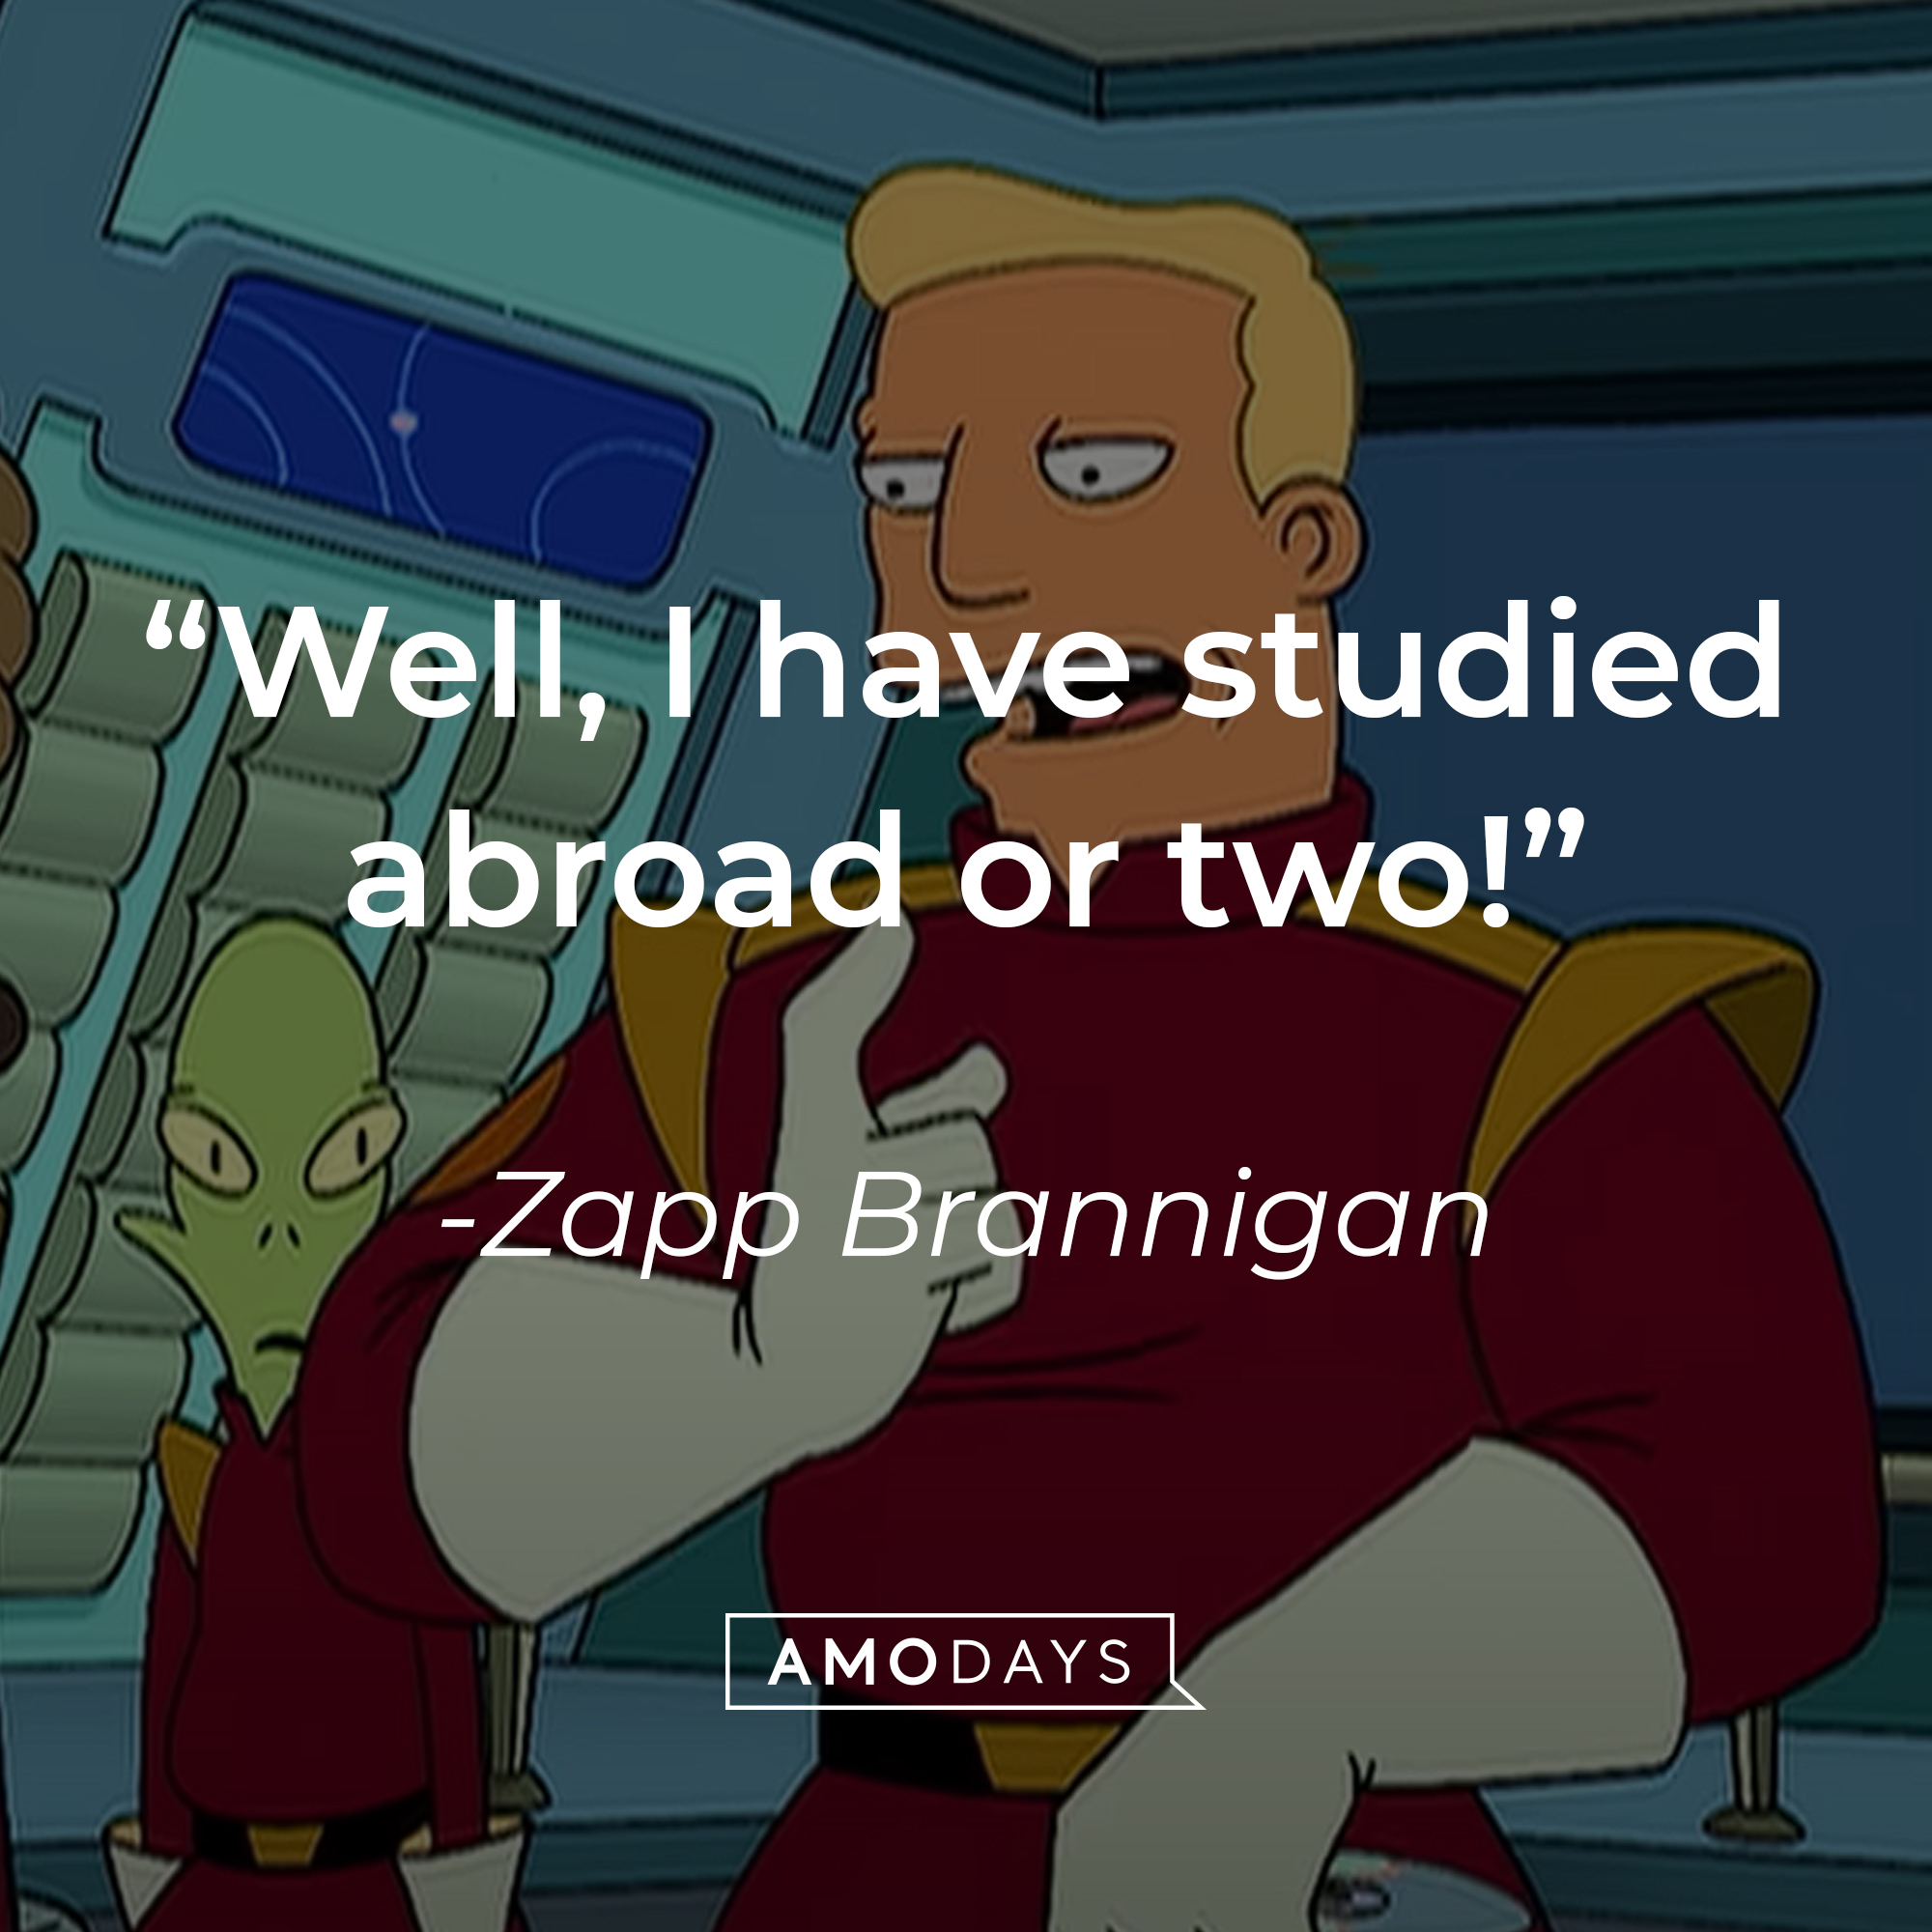 Zapp Brannigan's quote: "Well, I have studied abroad or two!" | Source: YouTube/adultswim